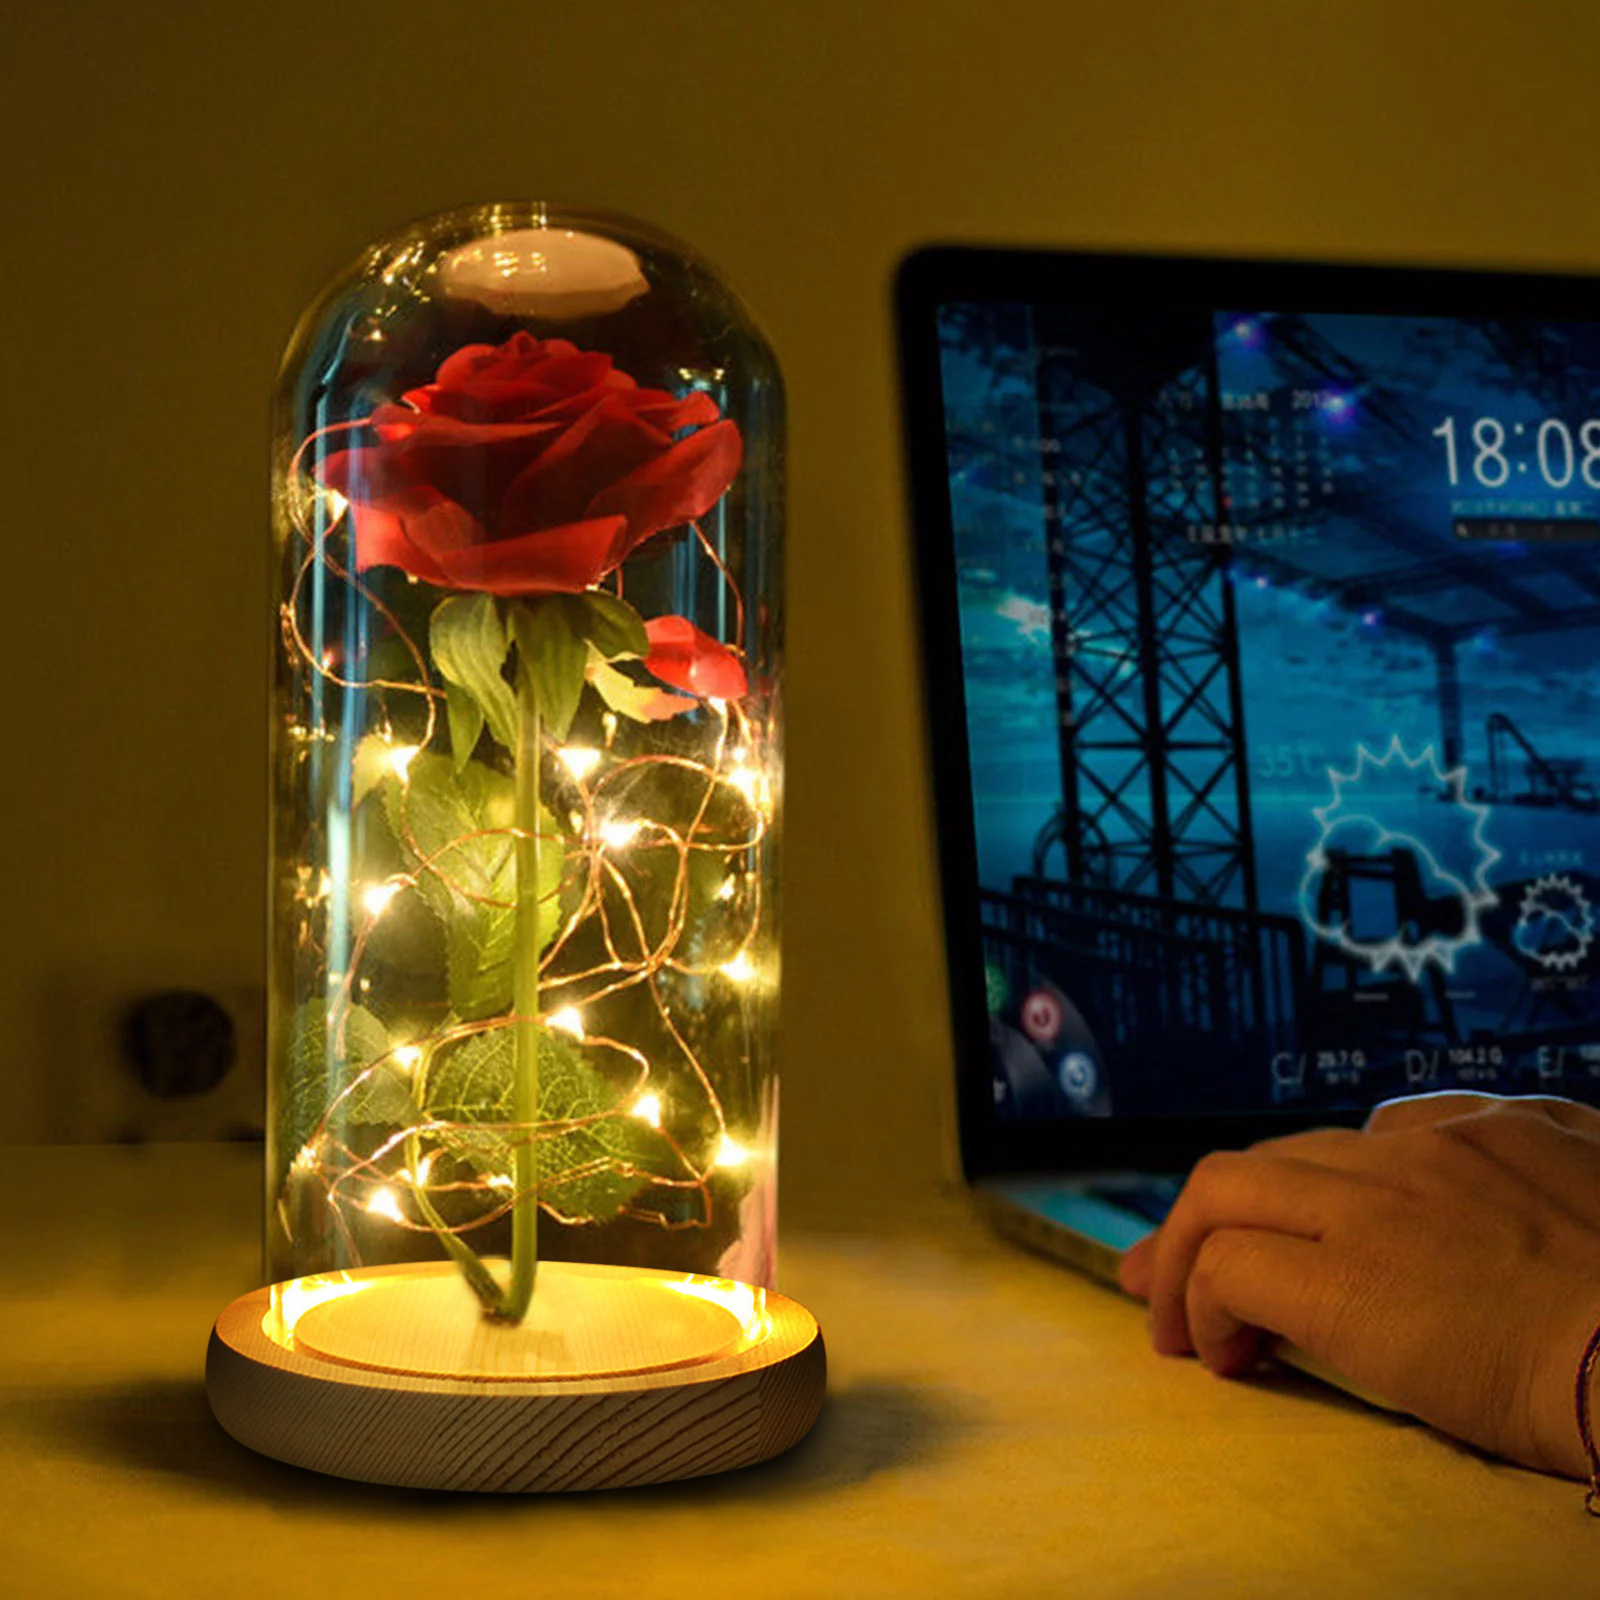 Enchanted Red Silk Rose Light, Beauty and the Beast Rose in A Light Dome, Home/Office or Home Decorations, Best Gift for Her on Valentine's Day, Anniversary, Mother’s Day Gifts, Christmas Gift - image 3 of 8